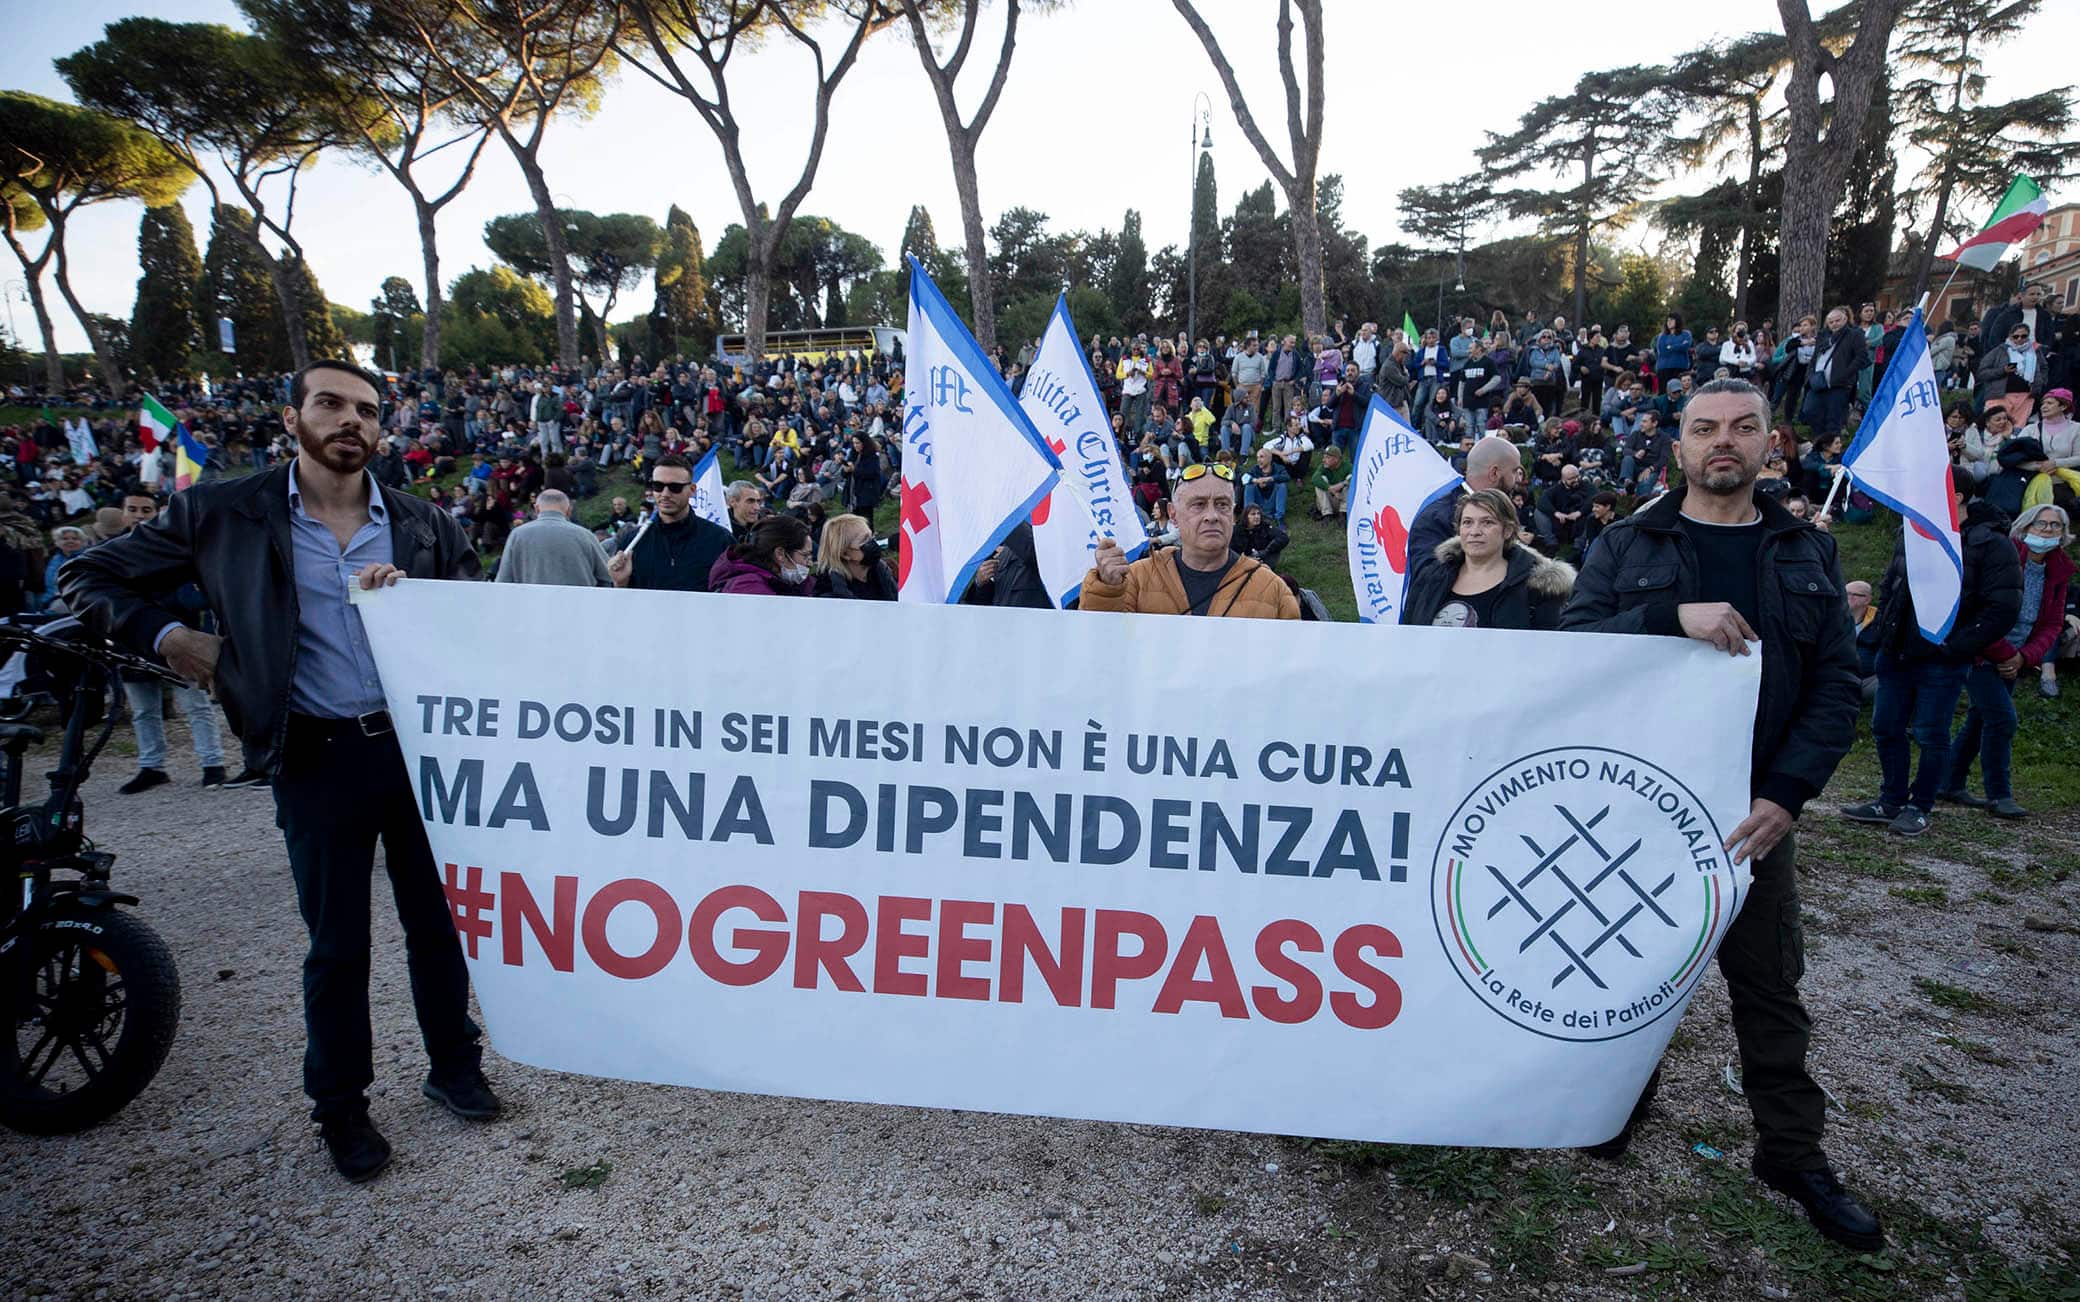 People take part in a 'No Green Pass' rally at the Circus Maximus, in Rome, Italy, 20 November 2021. The obligation to have the Green Pass coronavirus vaccine passport to enter all Italian public and private workplaces came into force last 15 October. 
ANSA/ MASSIMO PERCOSSI